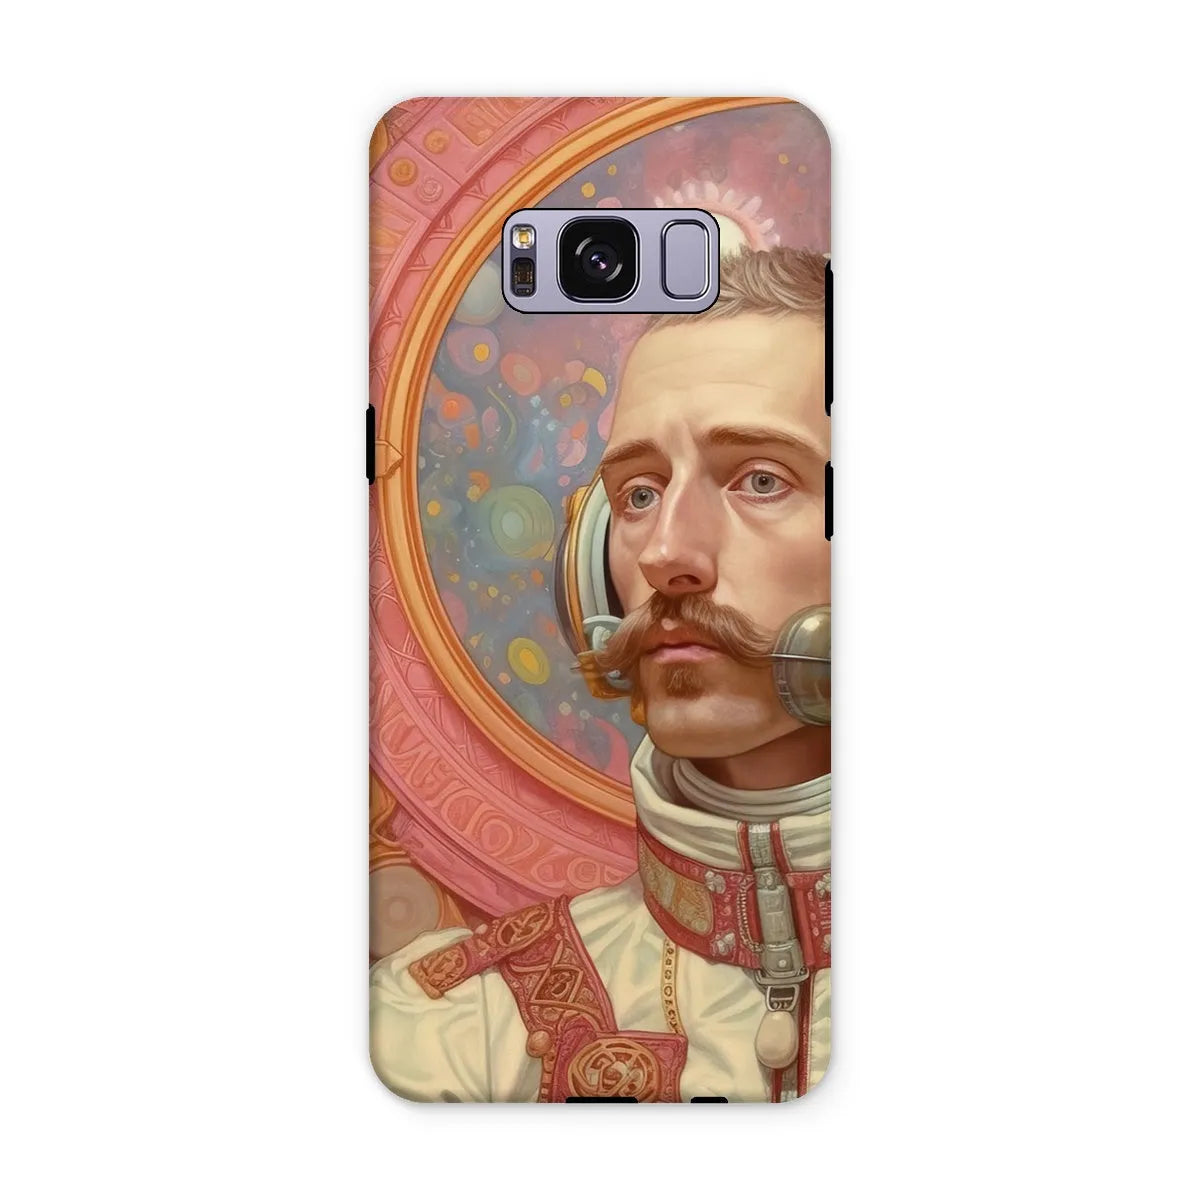 Axel The Gay Astronaut - Gay Aesthetic Art Phone Case - Samsung Galaxy S8 Plus / Matte - Mobile Phone Cases - Aesthetic